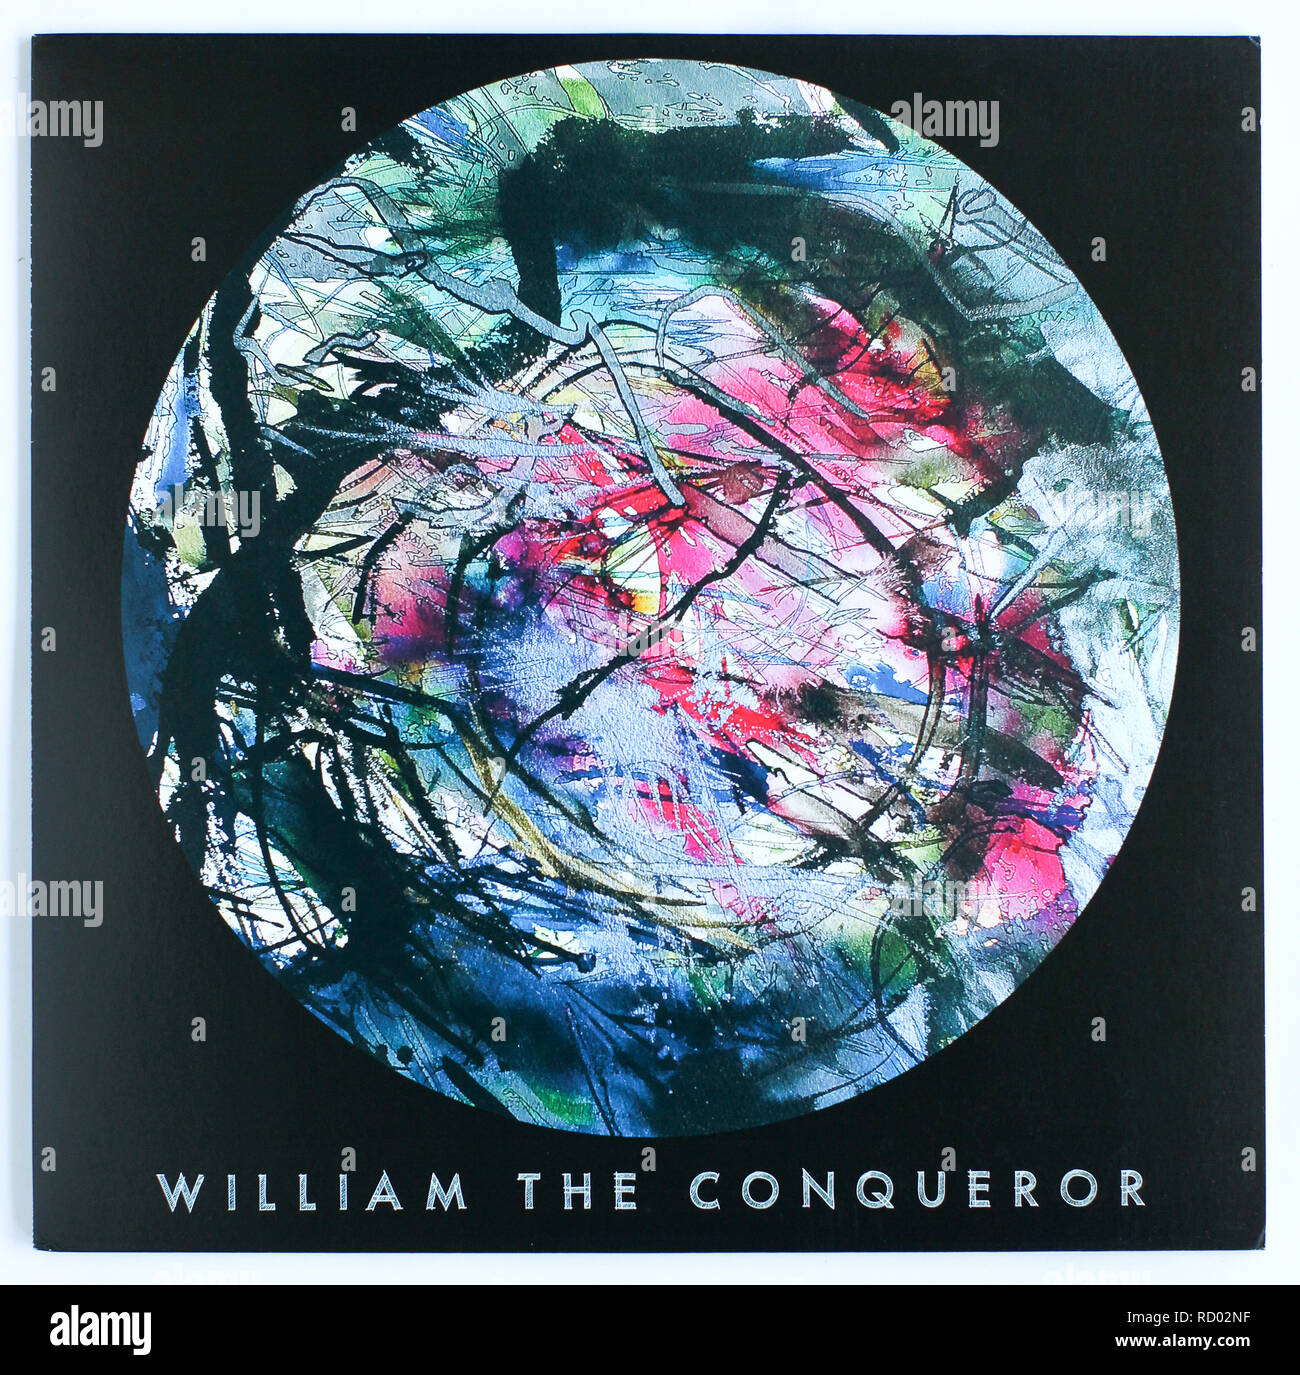 The cover of Proud Disturber of the Peace by William The Conqueror. 2017 album on Loose Records - Editorial use only Stock Photo